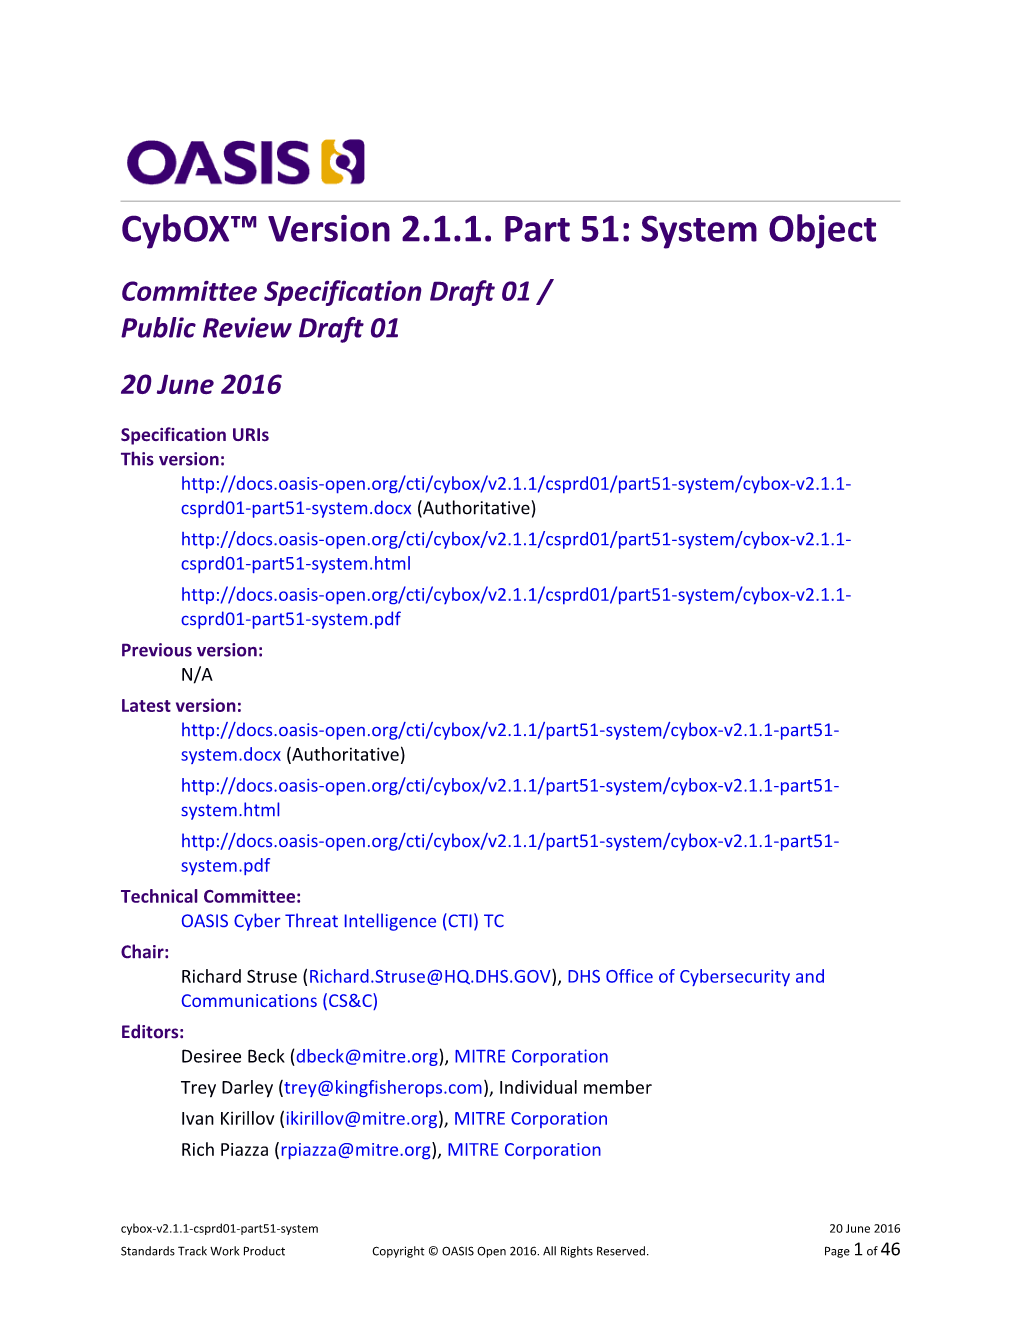 Cybox Version 2.1.1. Part 51: System Object